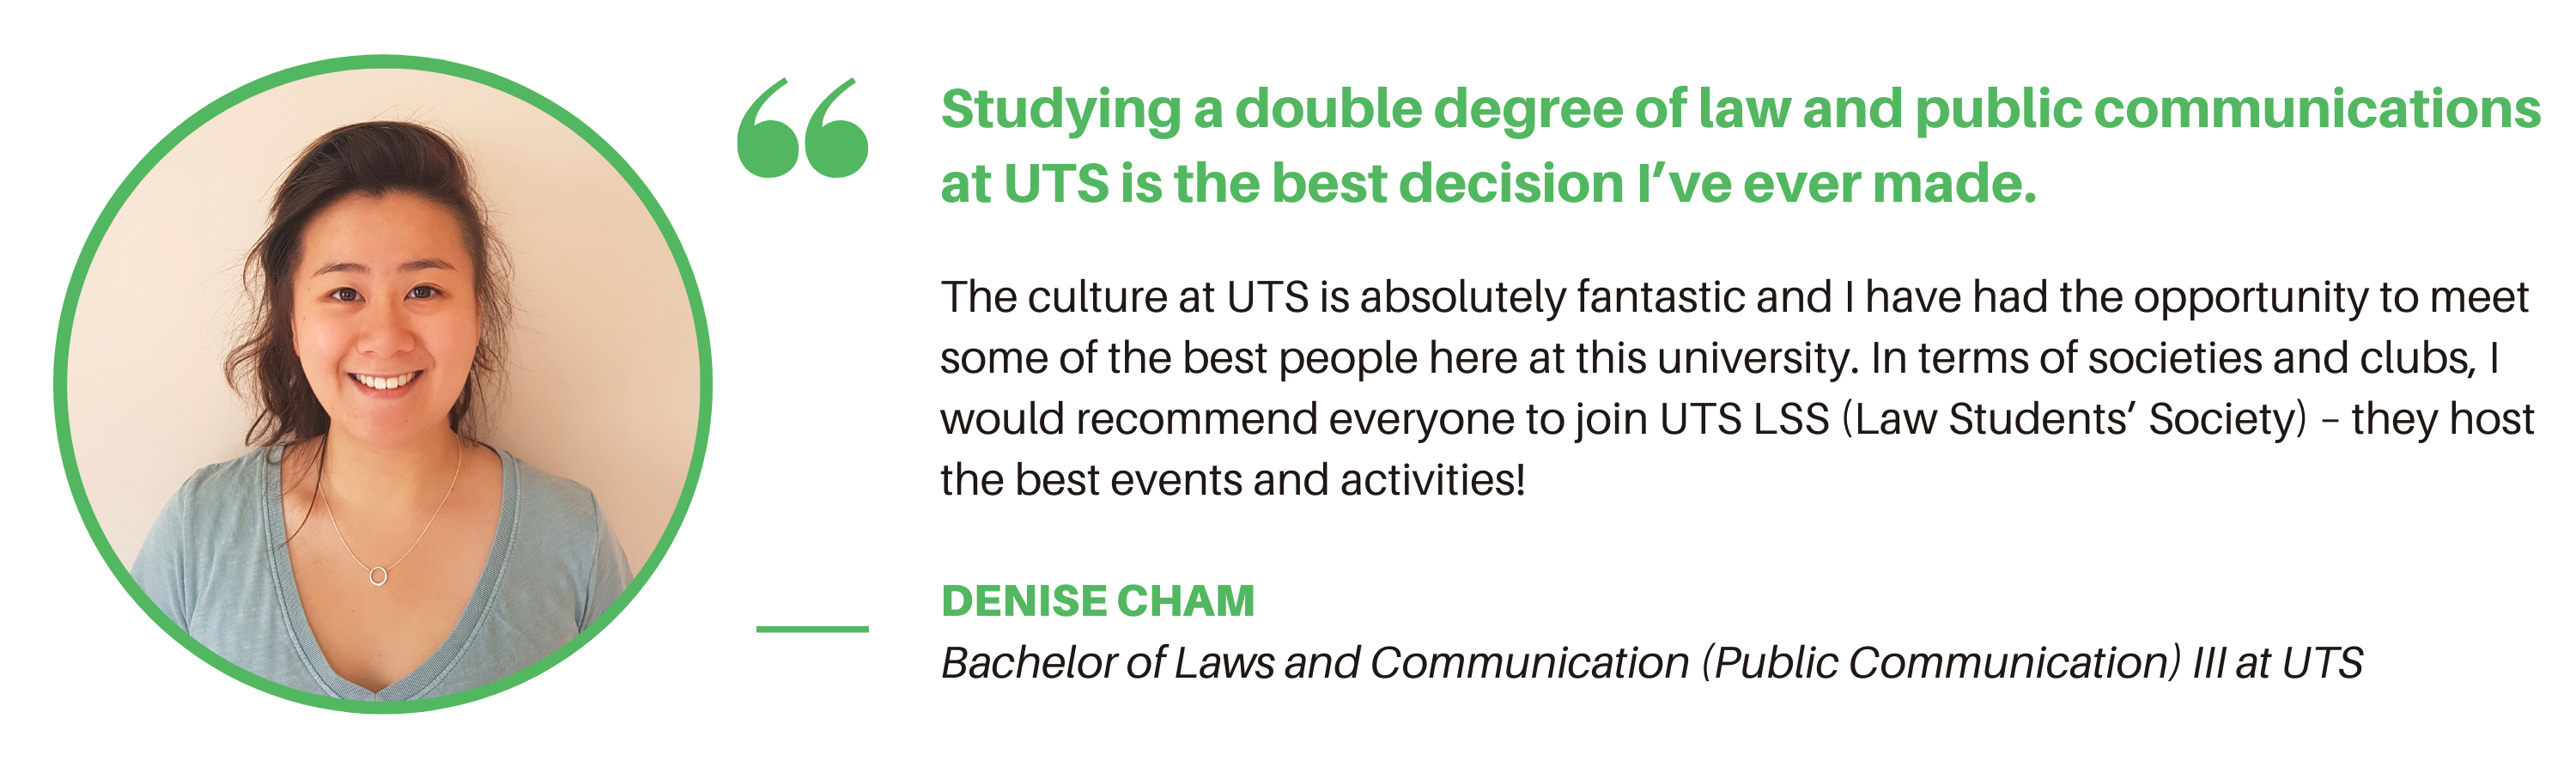 Bachelor of Law UTS - Quote